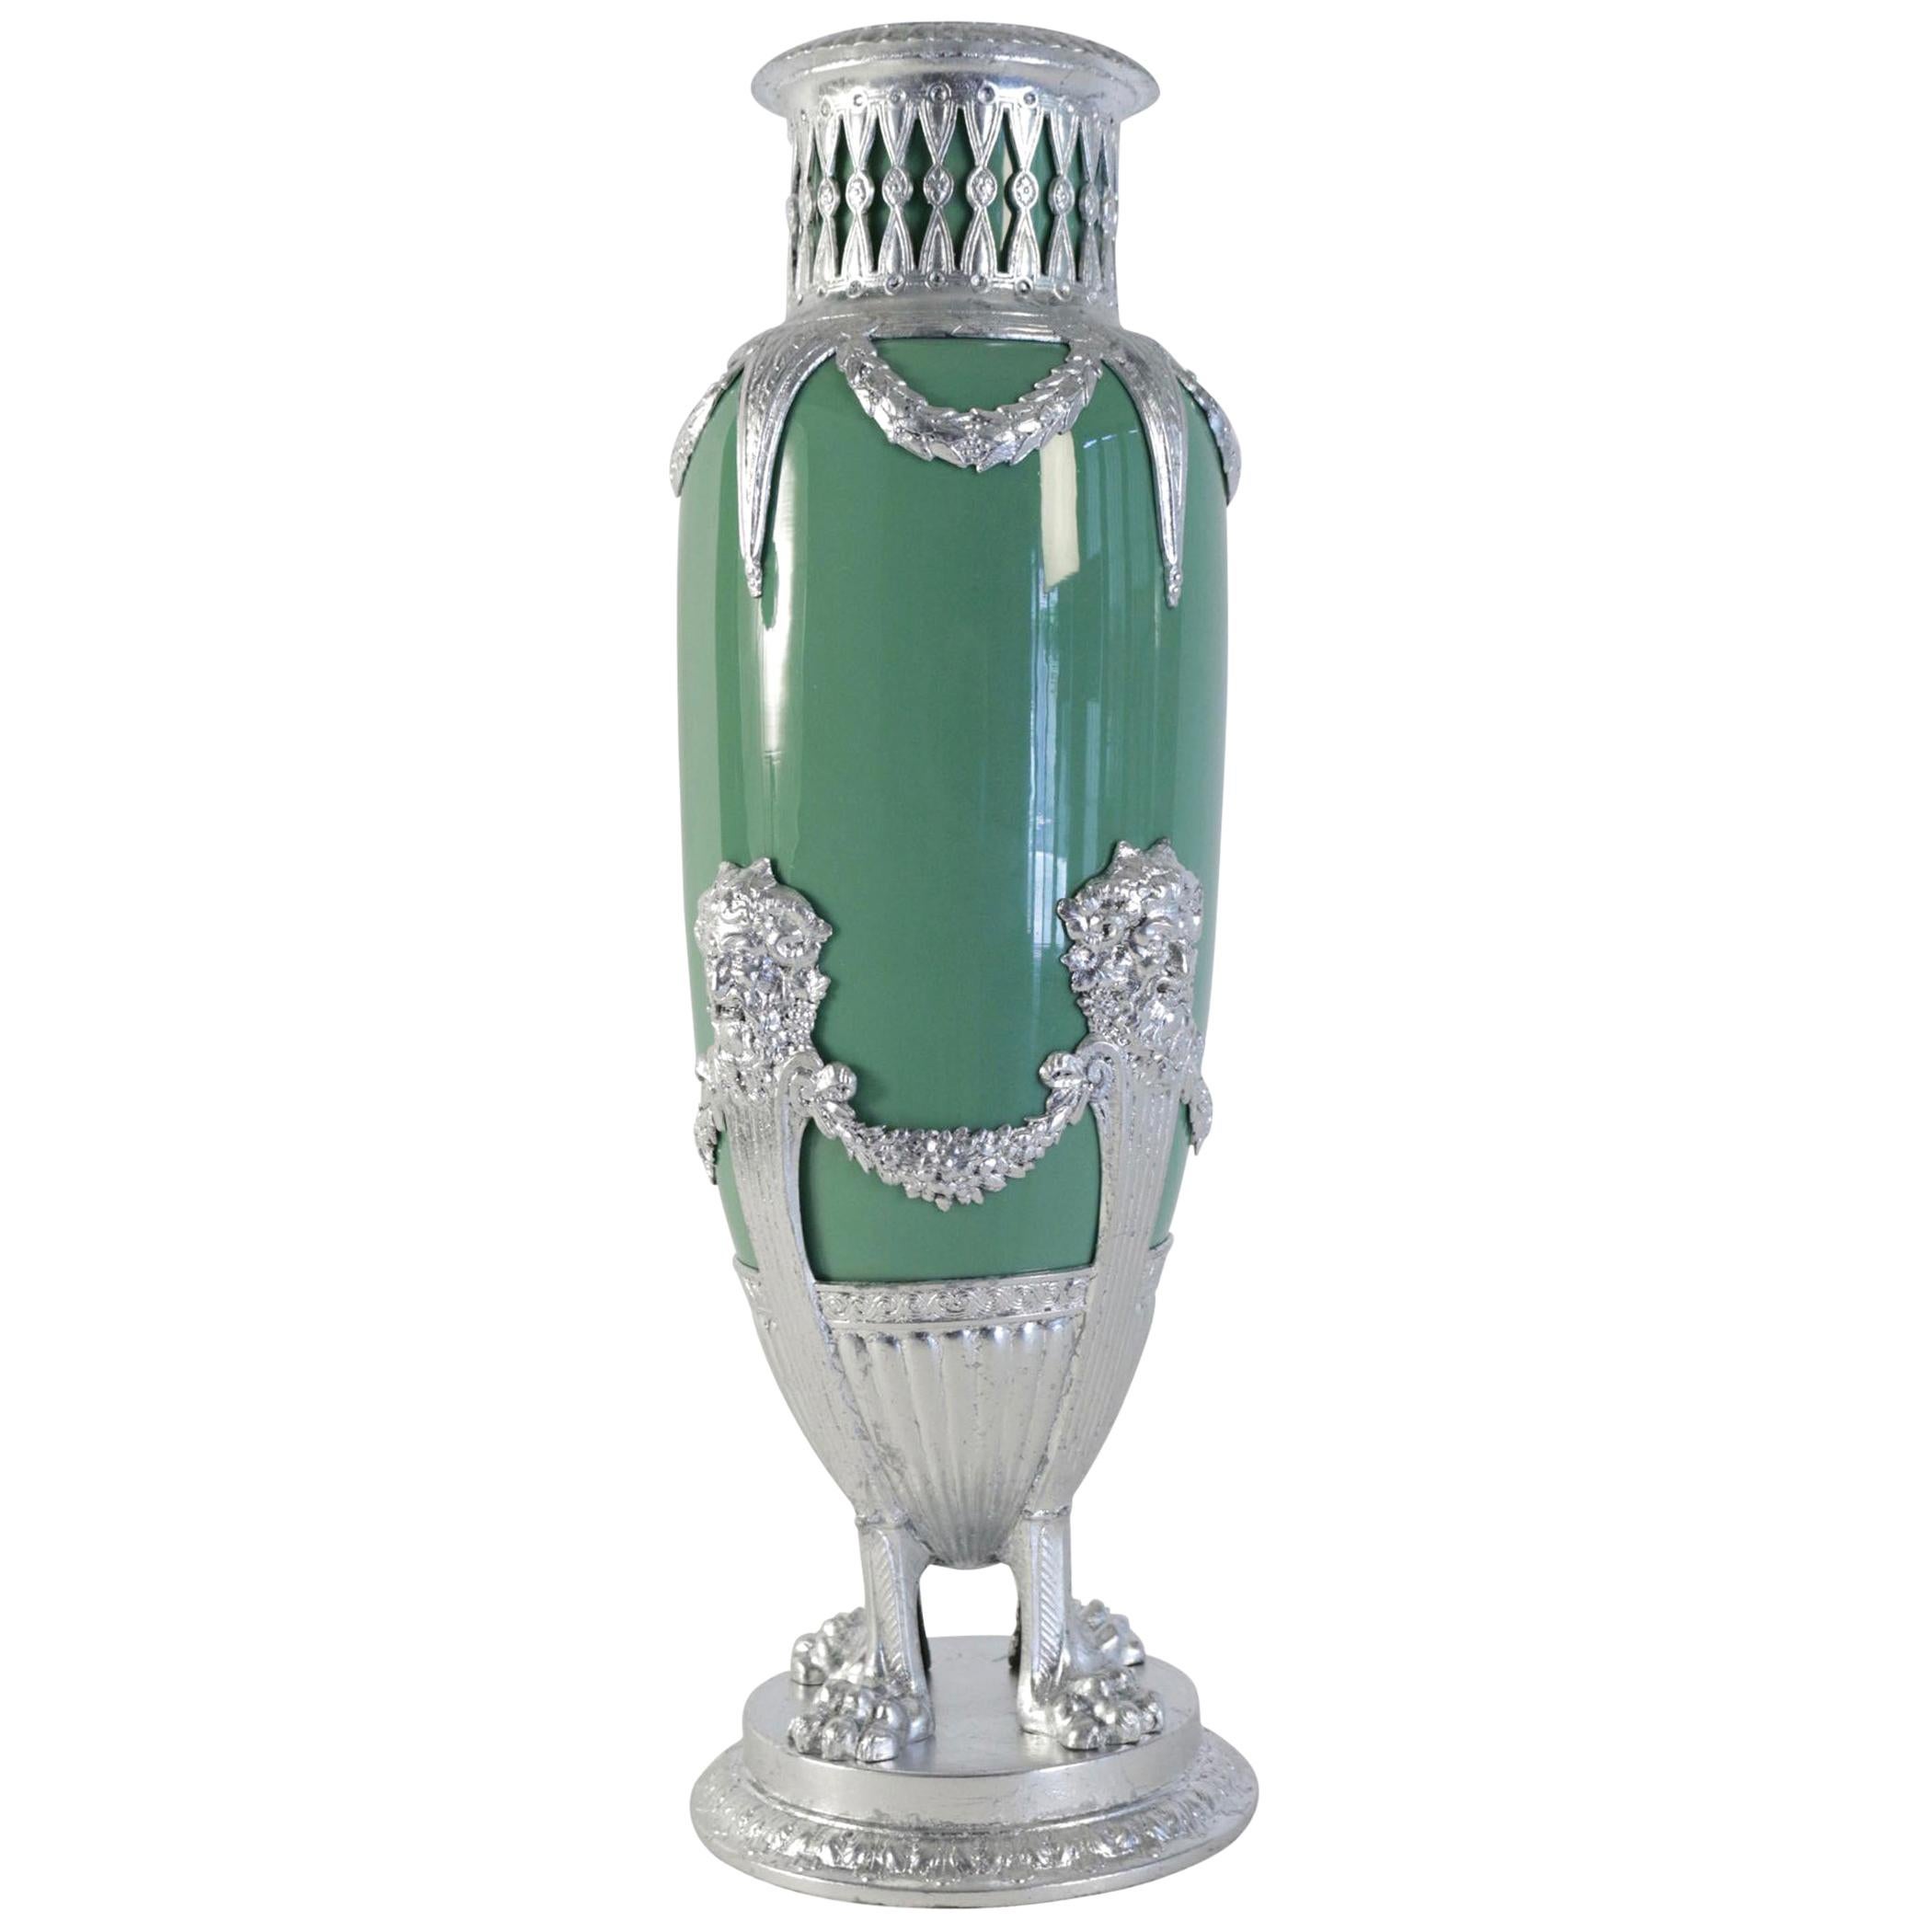 Celadon Vase in Faience, Silver Plate and Silver Leaf, 19th Century Period For Sale